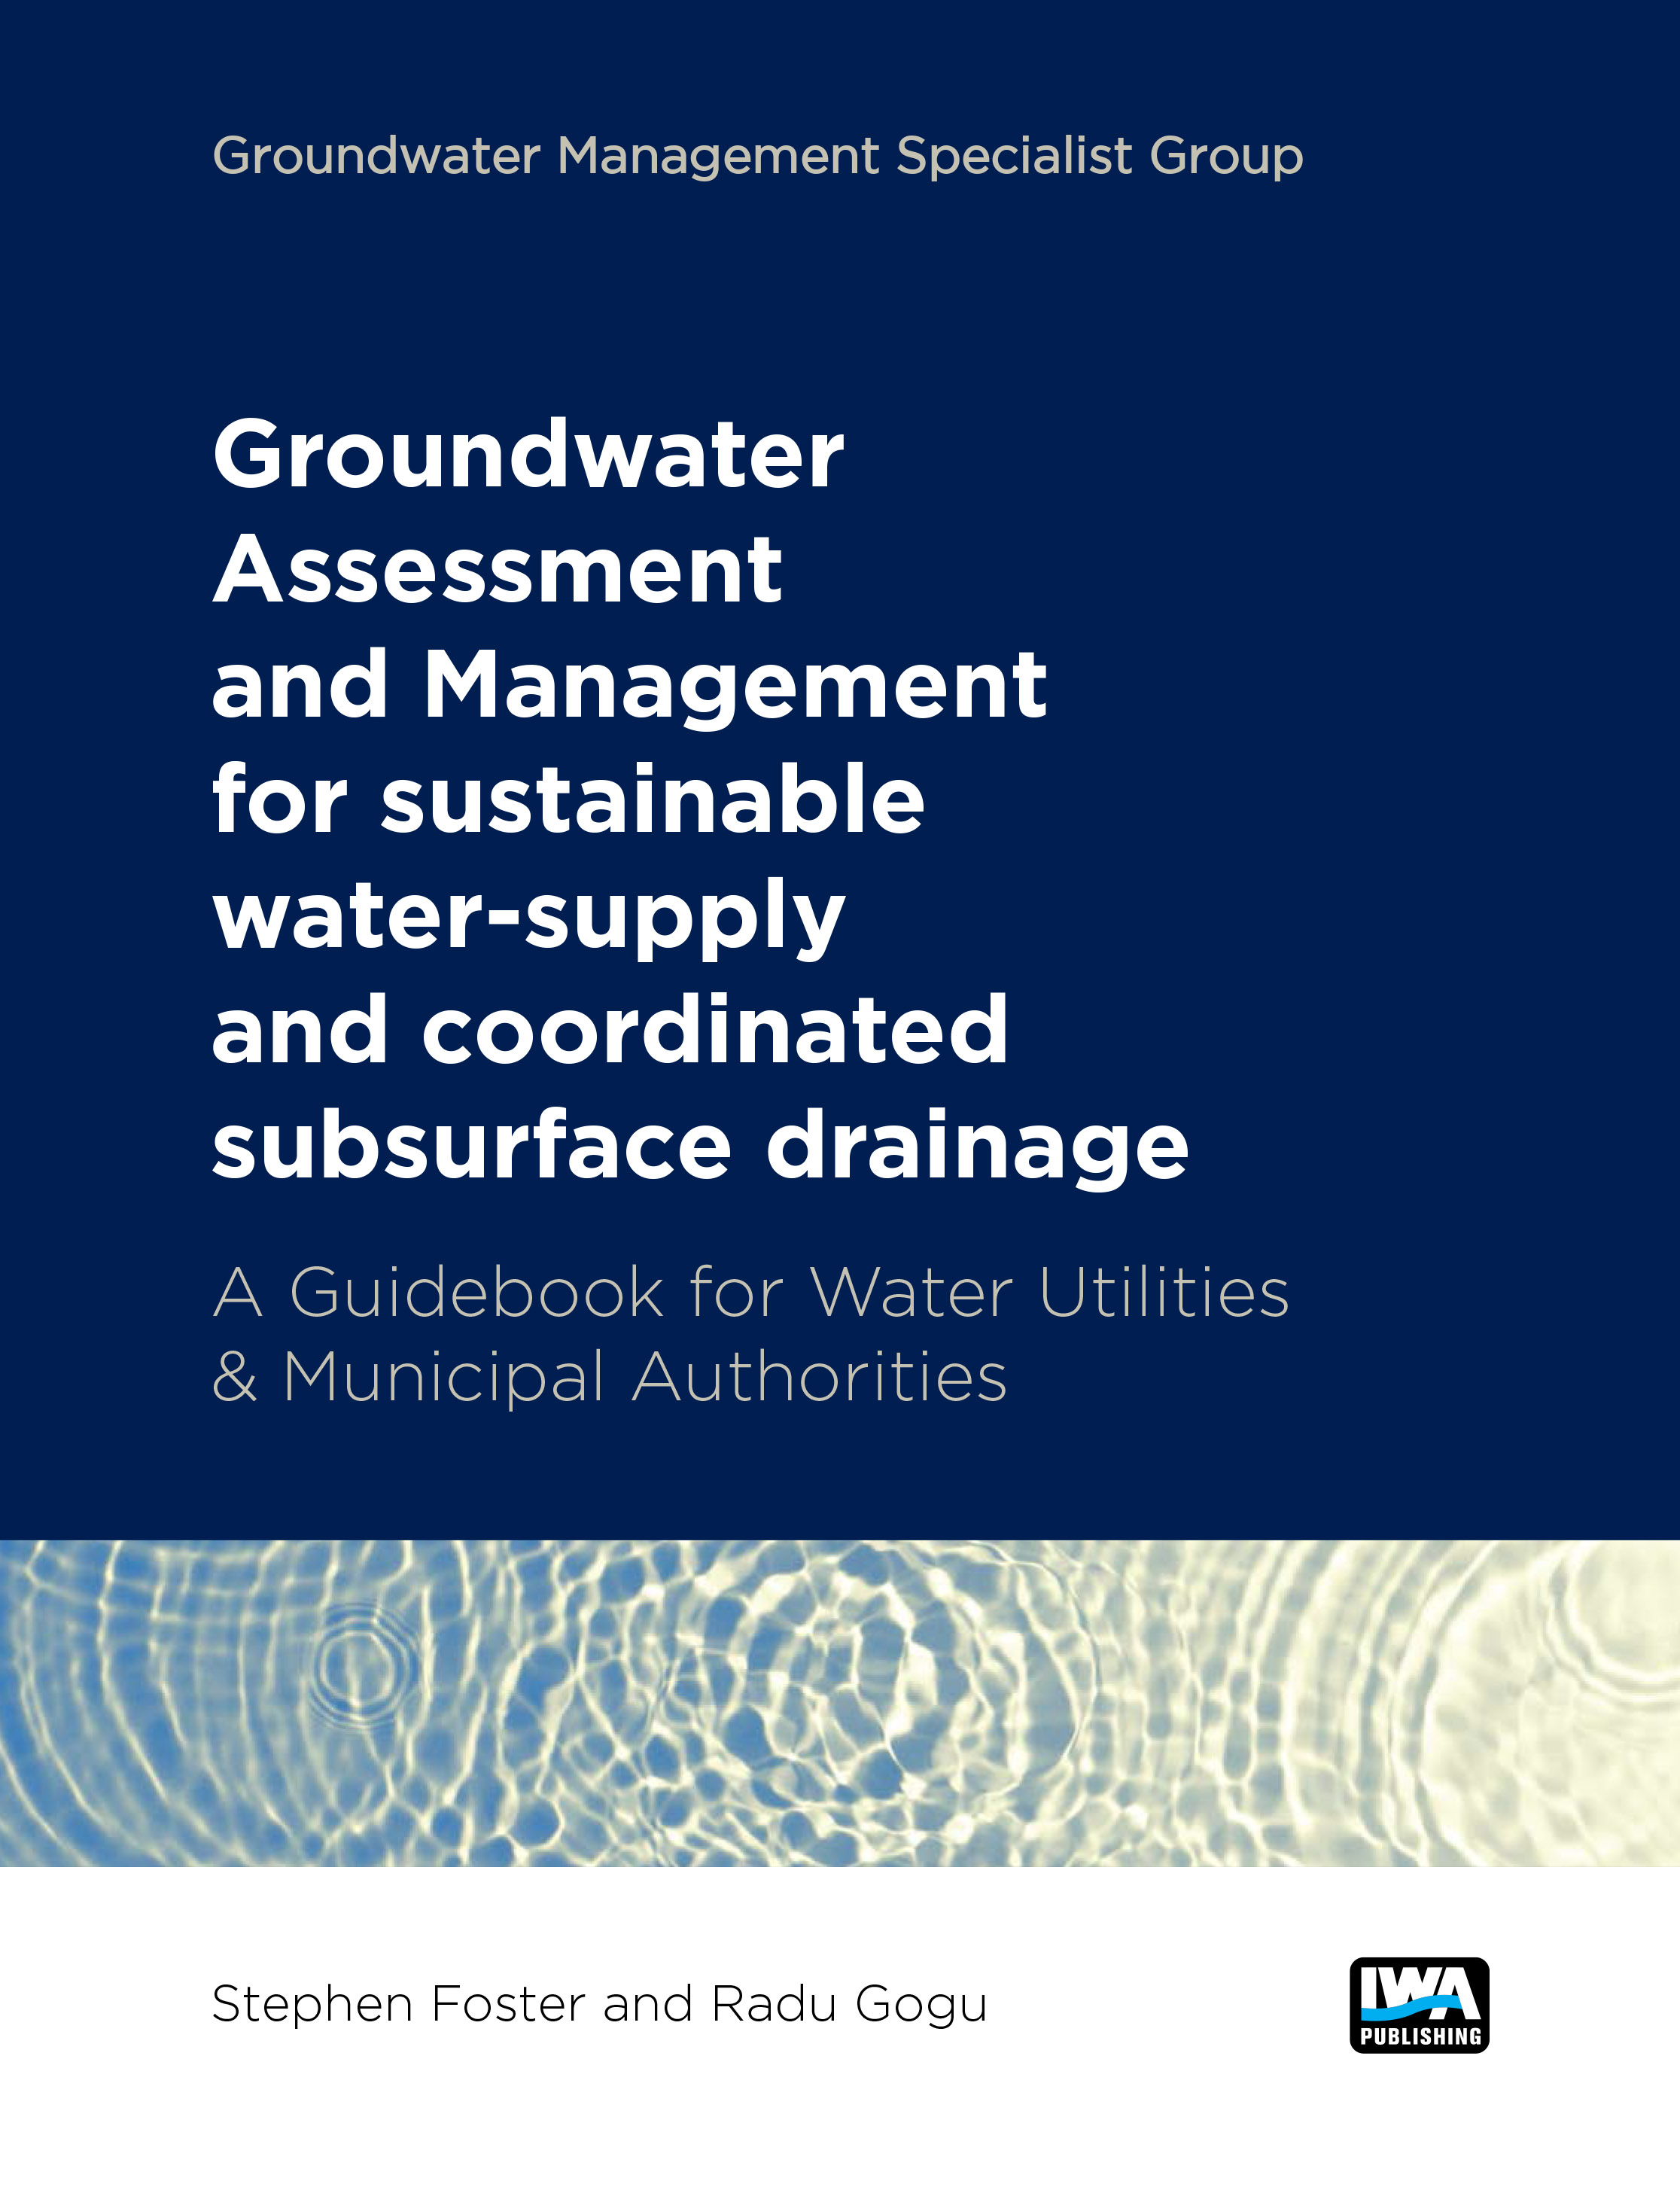 research work on groundwater